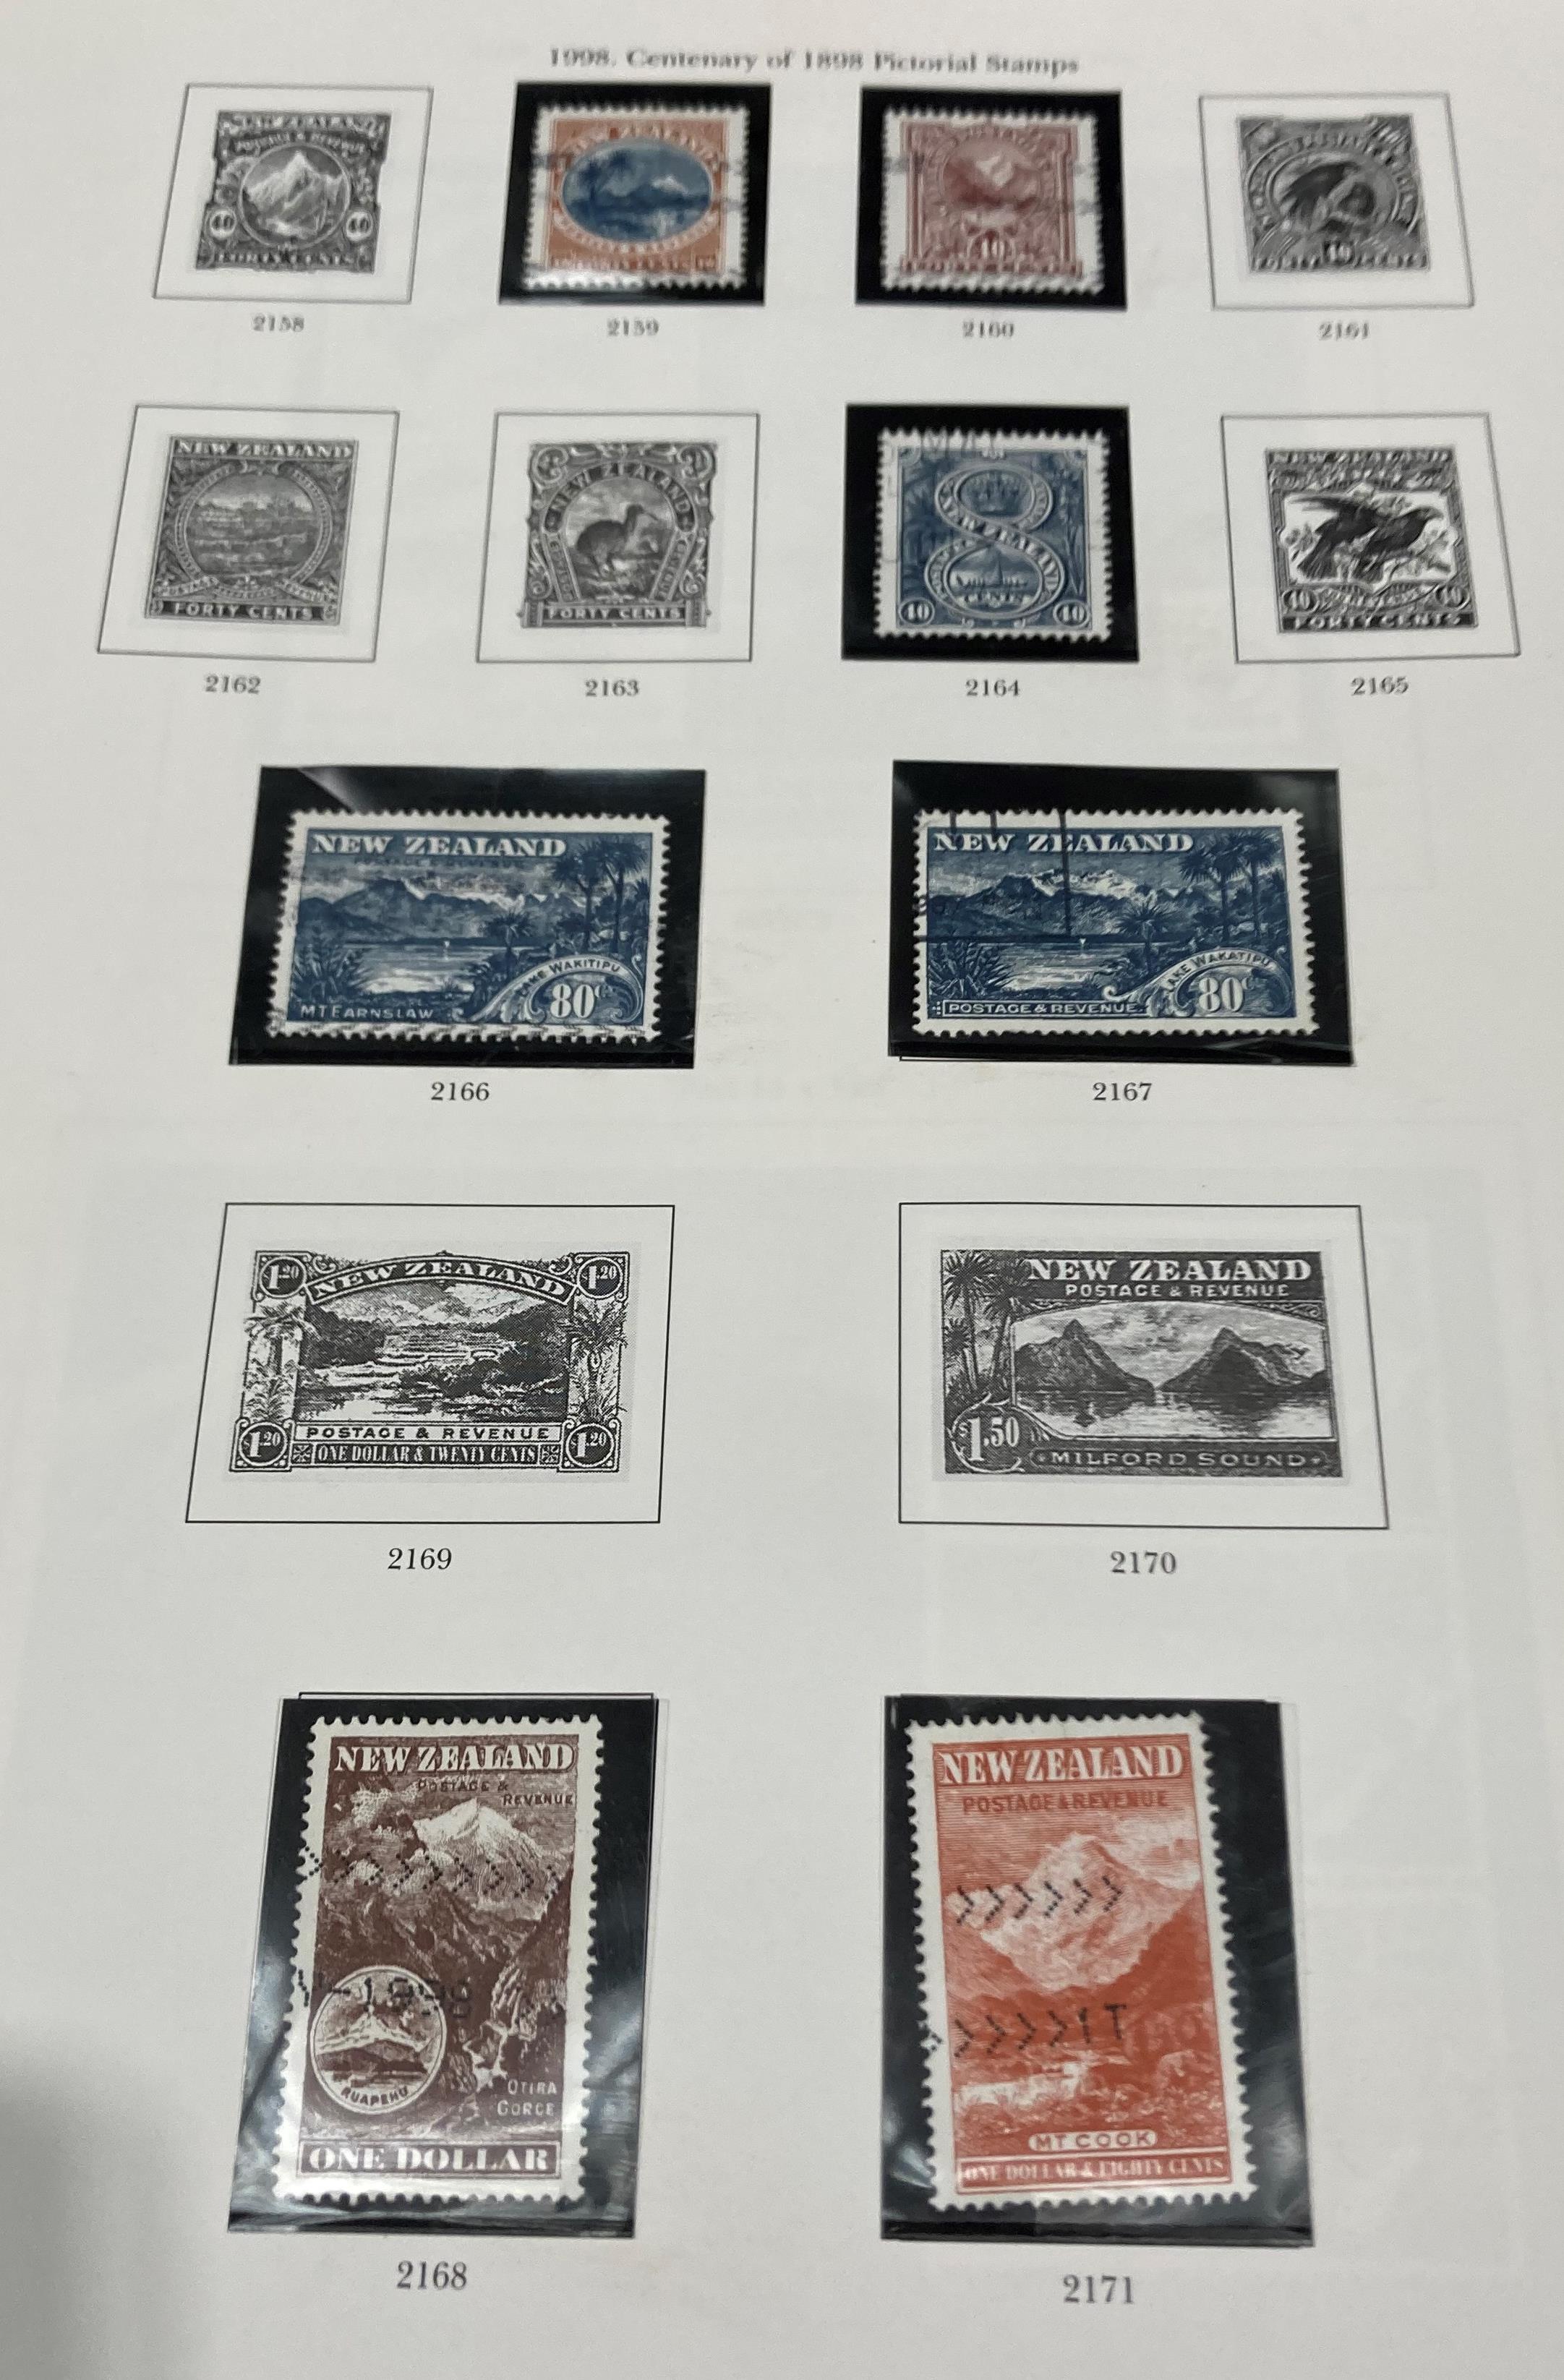 Six Stanley Gibbons and one other album containing stamps of New Zealand (saleroom location: S2 - Image 12 of 16